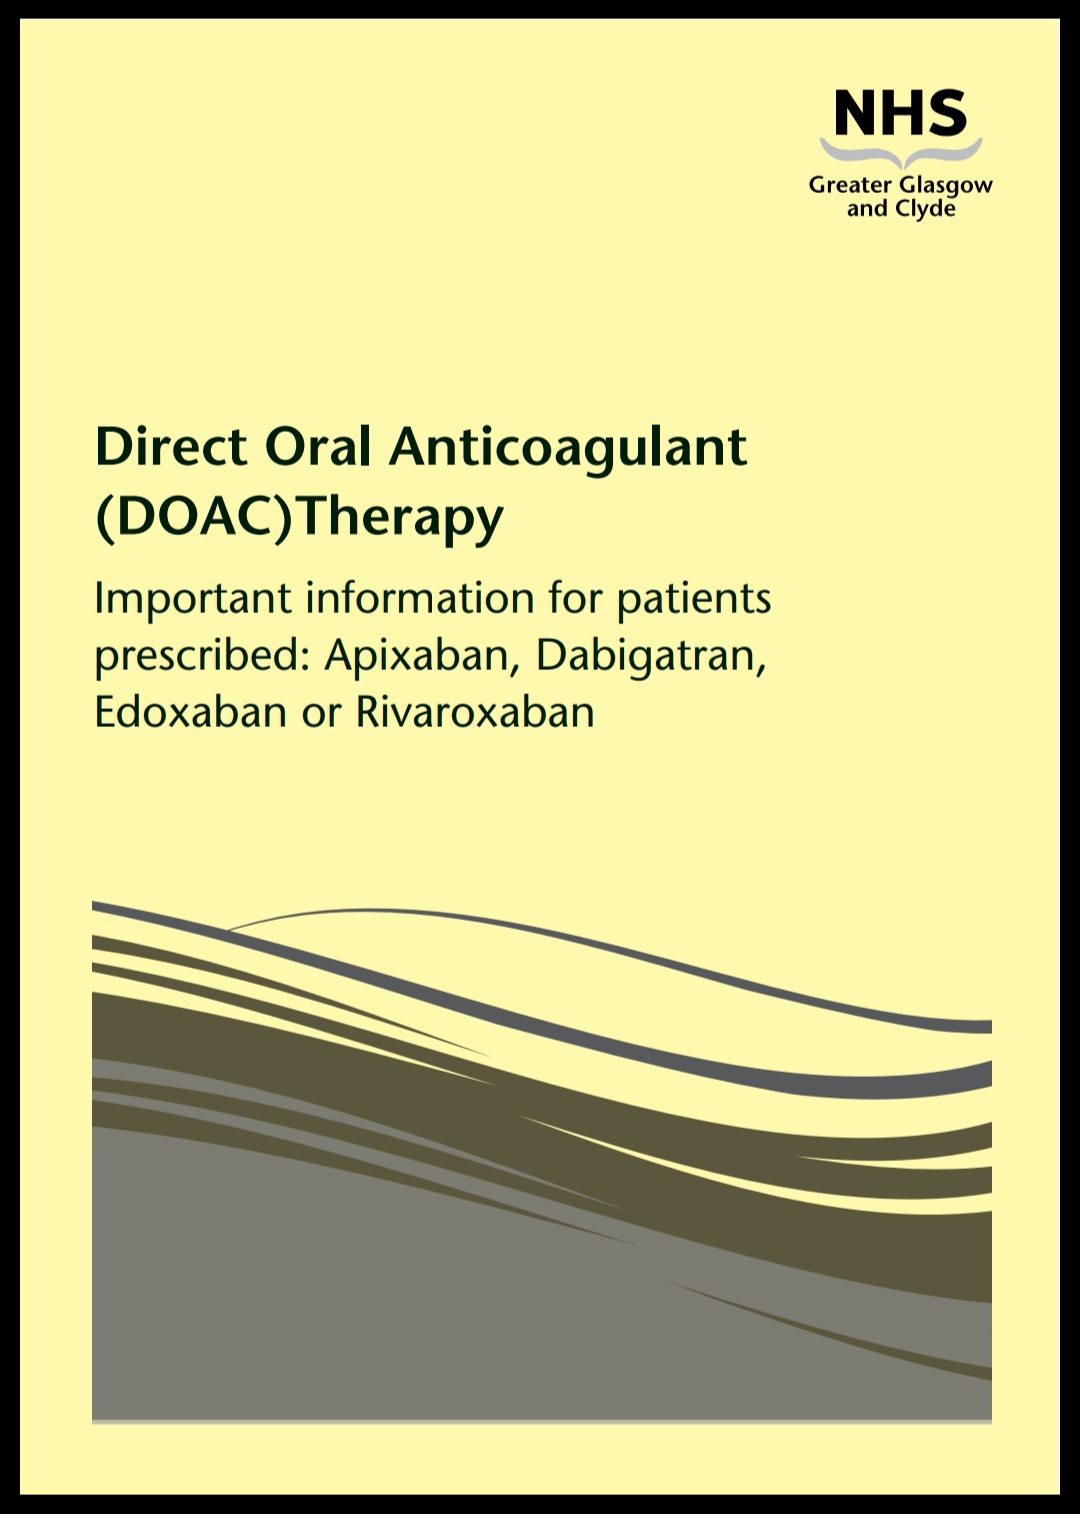 Image of front cover of the new NHSGGC DOAC booklet